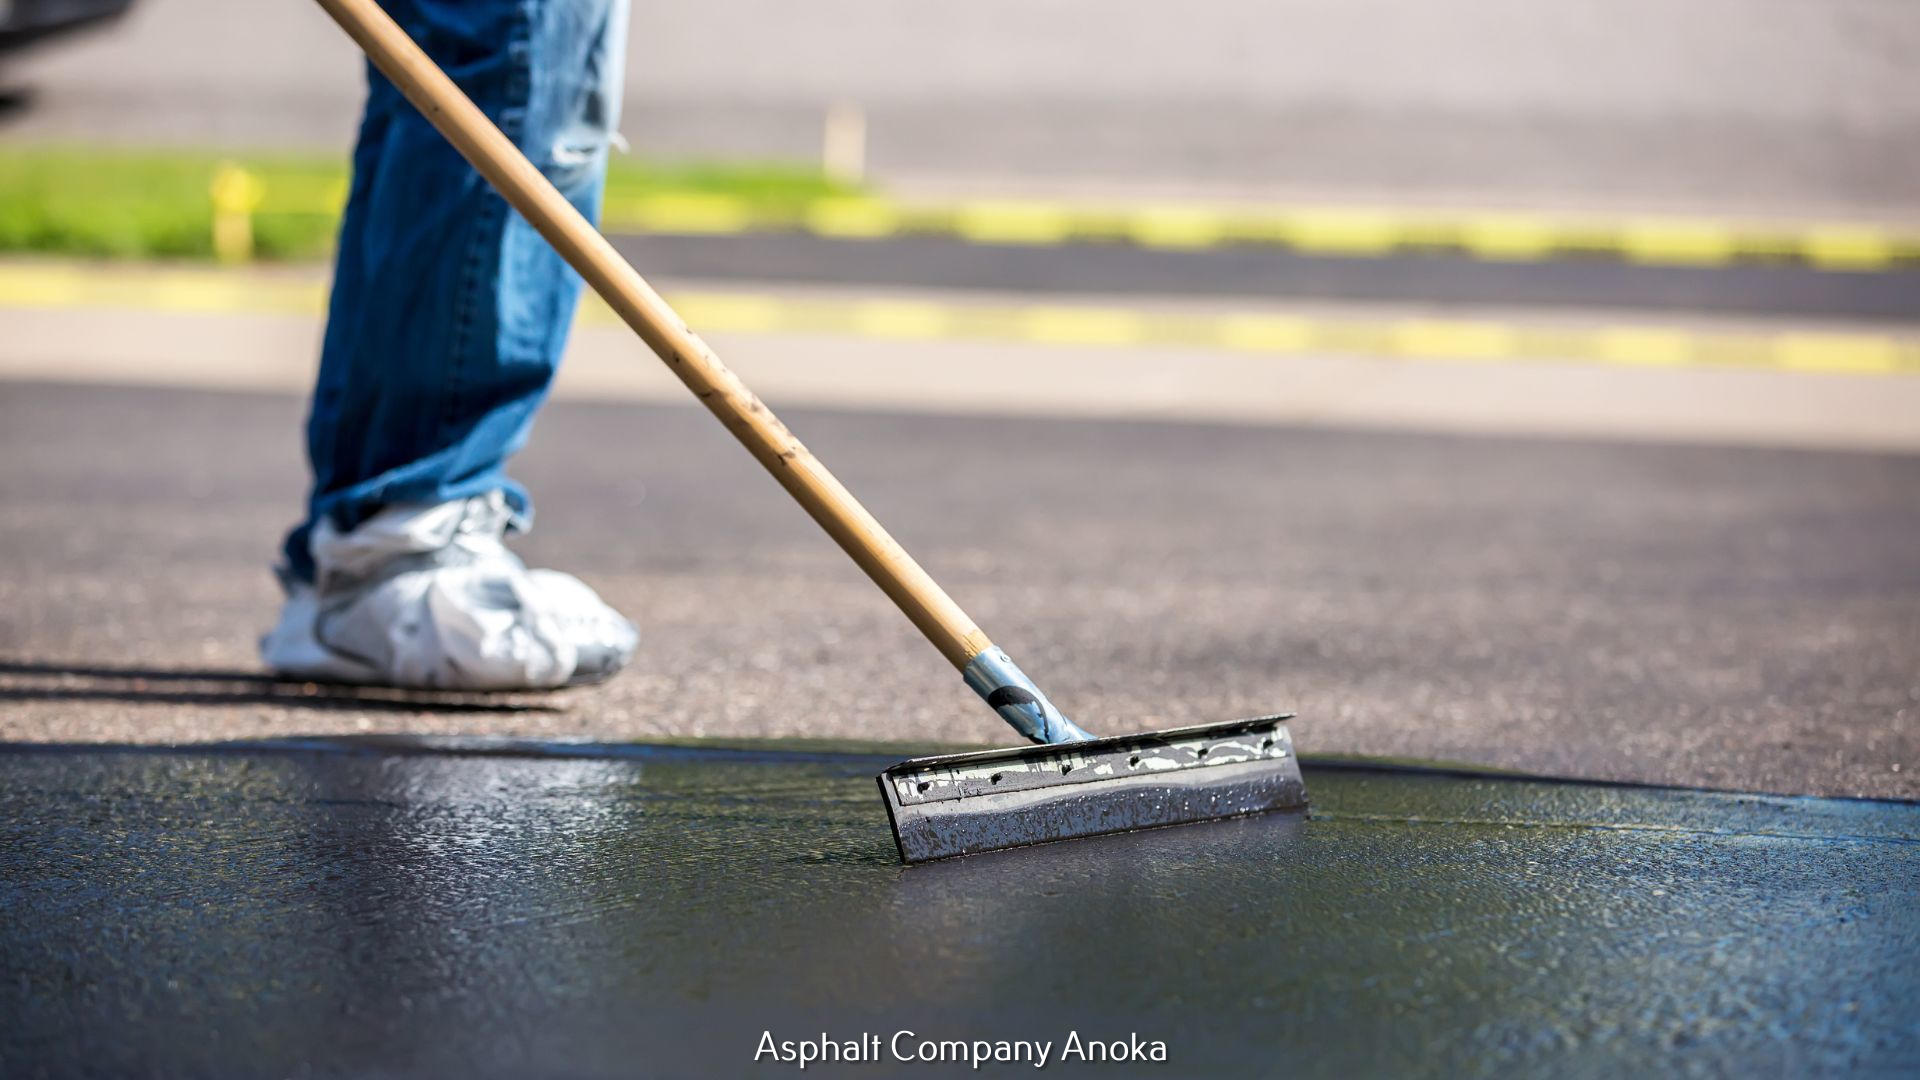 Anoka Family Paving Highlights Factors to Consider When Starting an Asphalt Paving Project